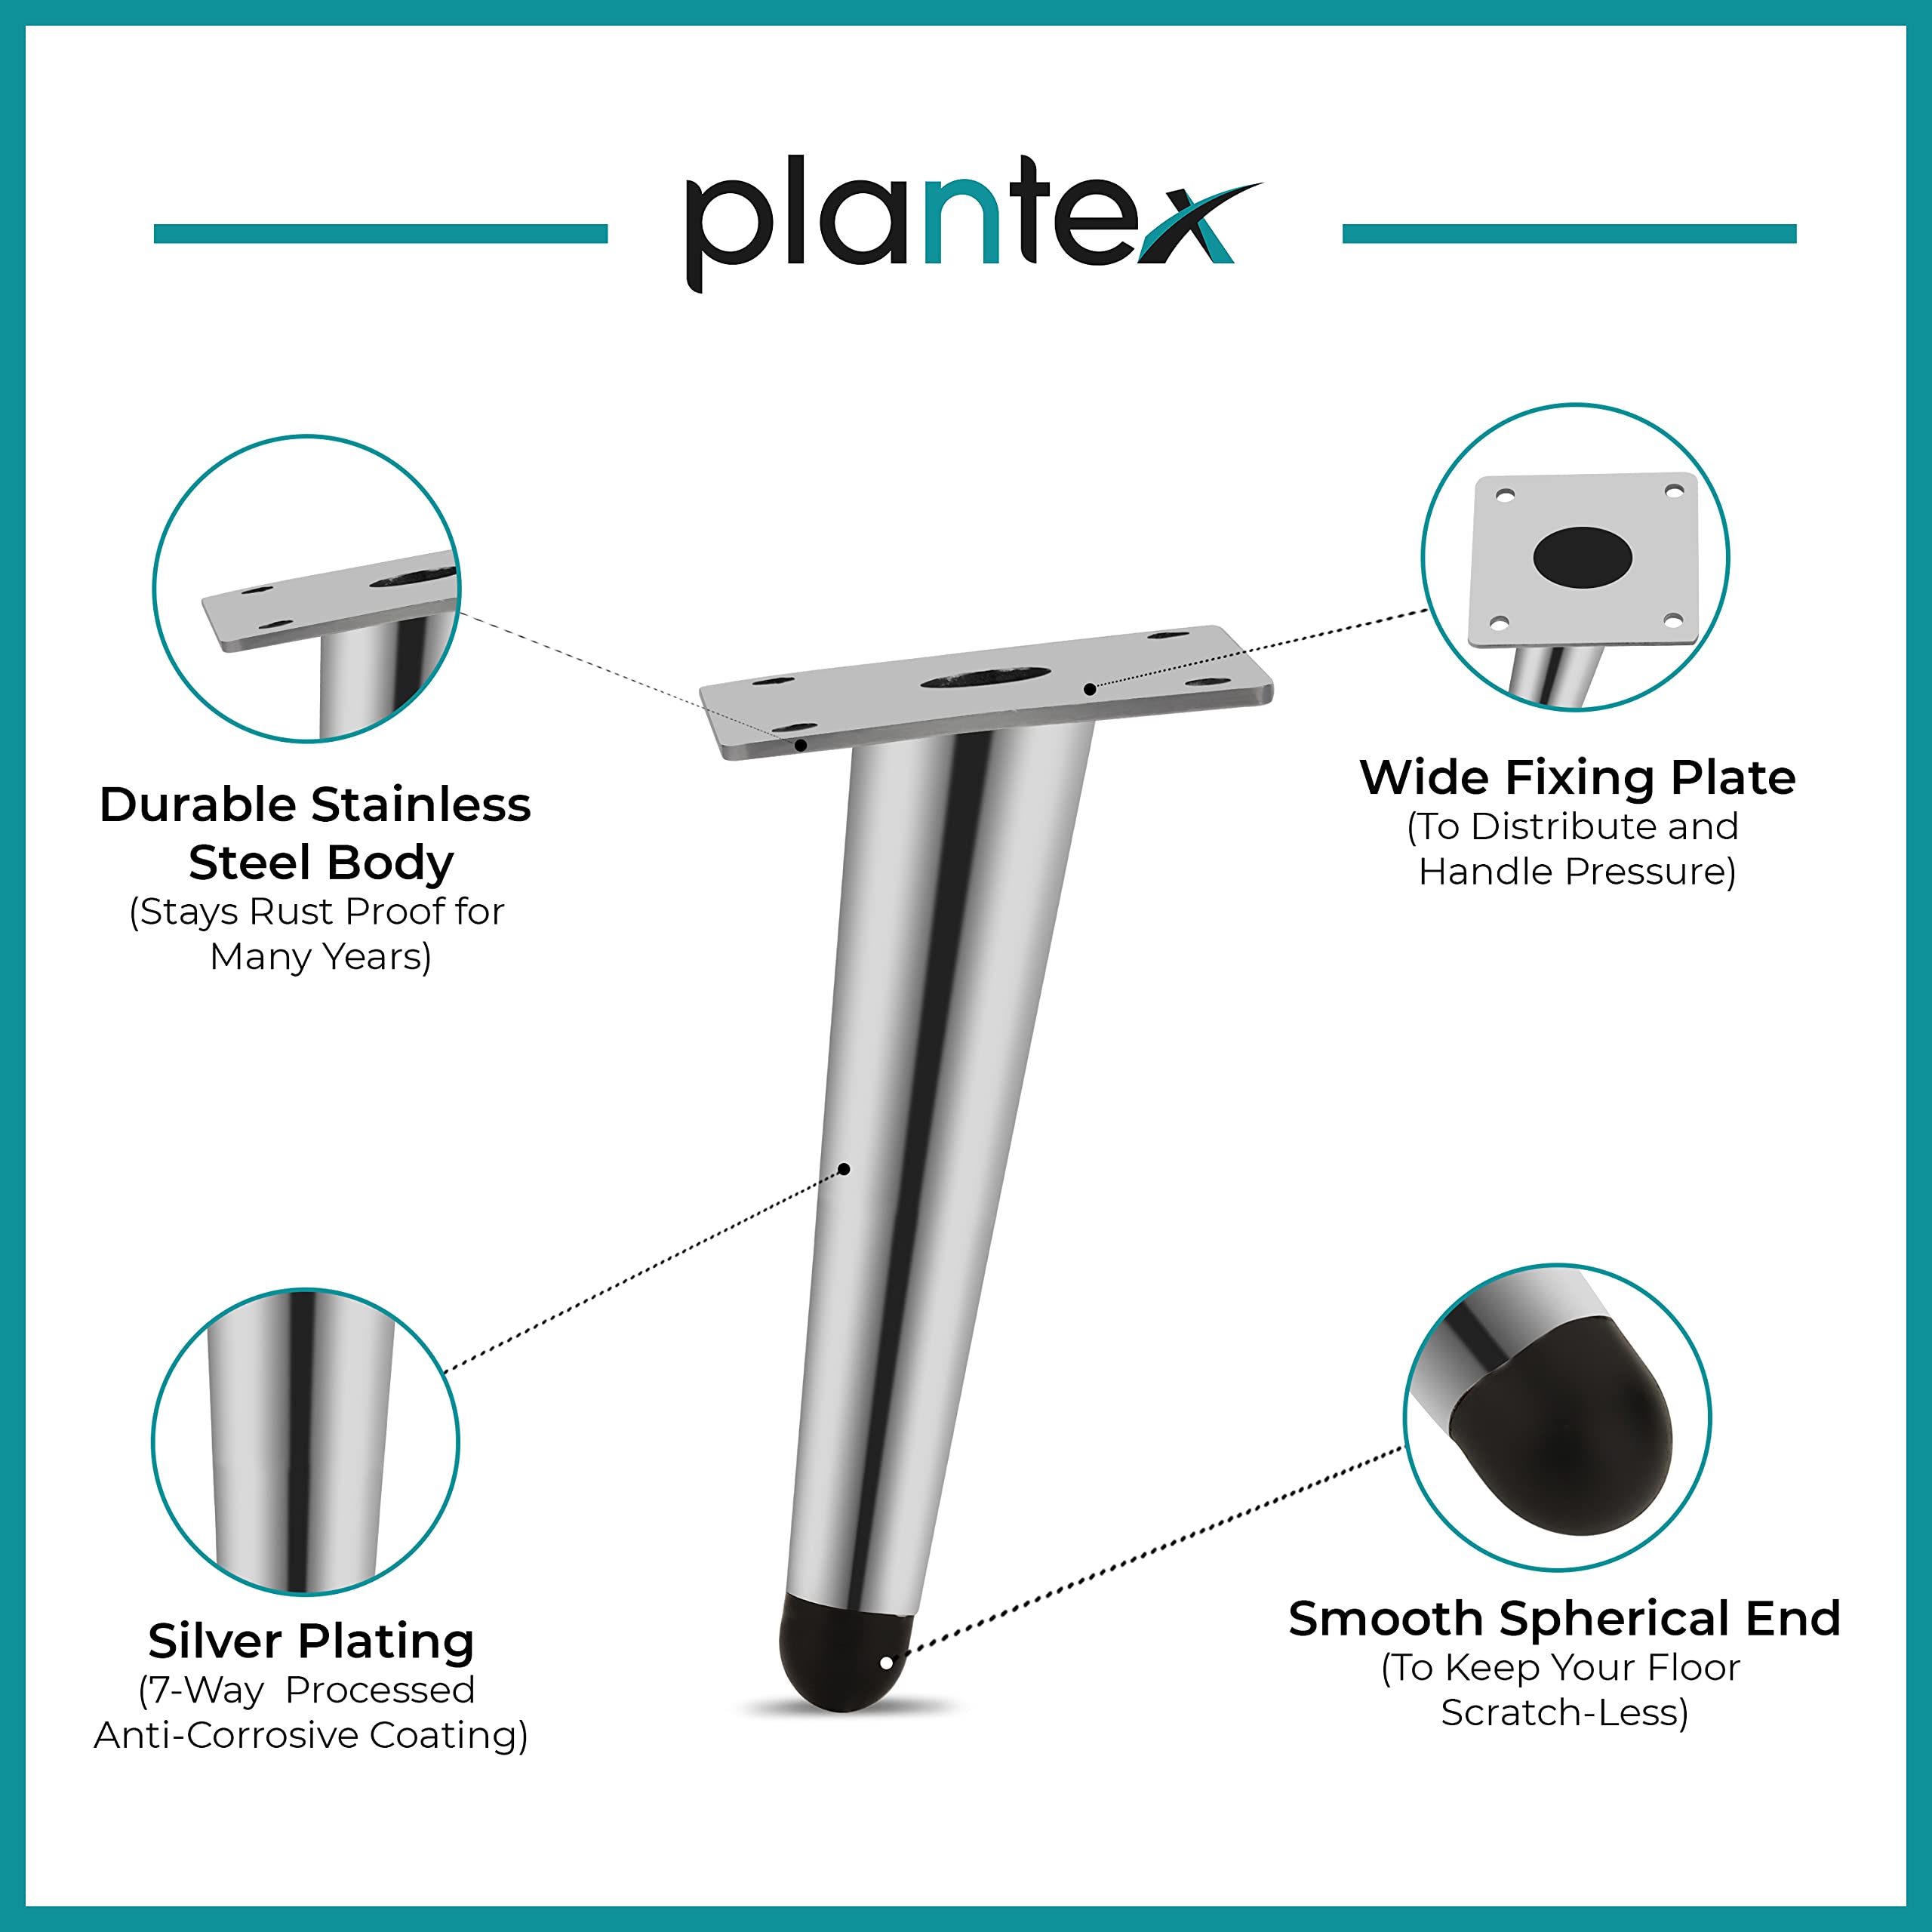 Plantex 304 Grade Stainless Steel 6 inch Sofa Leg/Bed Furniture Leg Pair for Home Furnitures (DTS-54-Chrome) – 10 Pcs